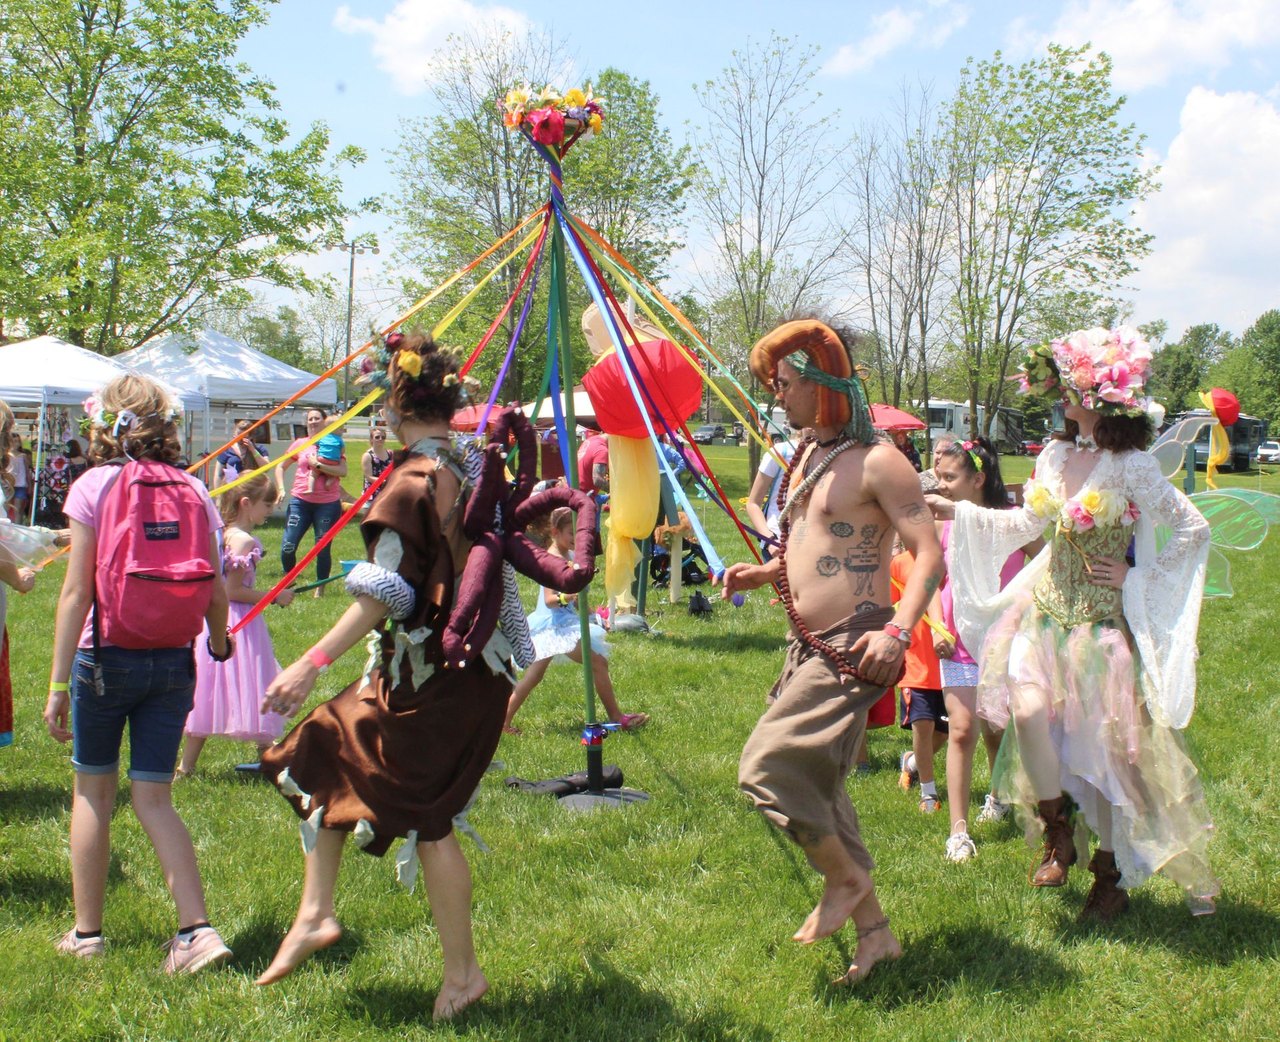 The Enchanted Fairy Festival In Indiana Is Sure To Make Your Day Magical